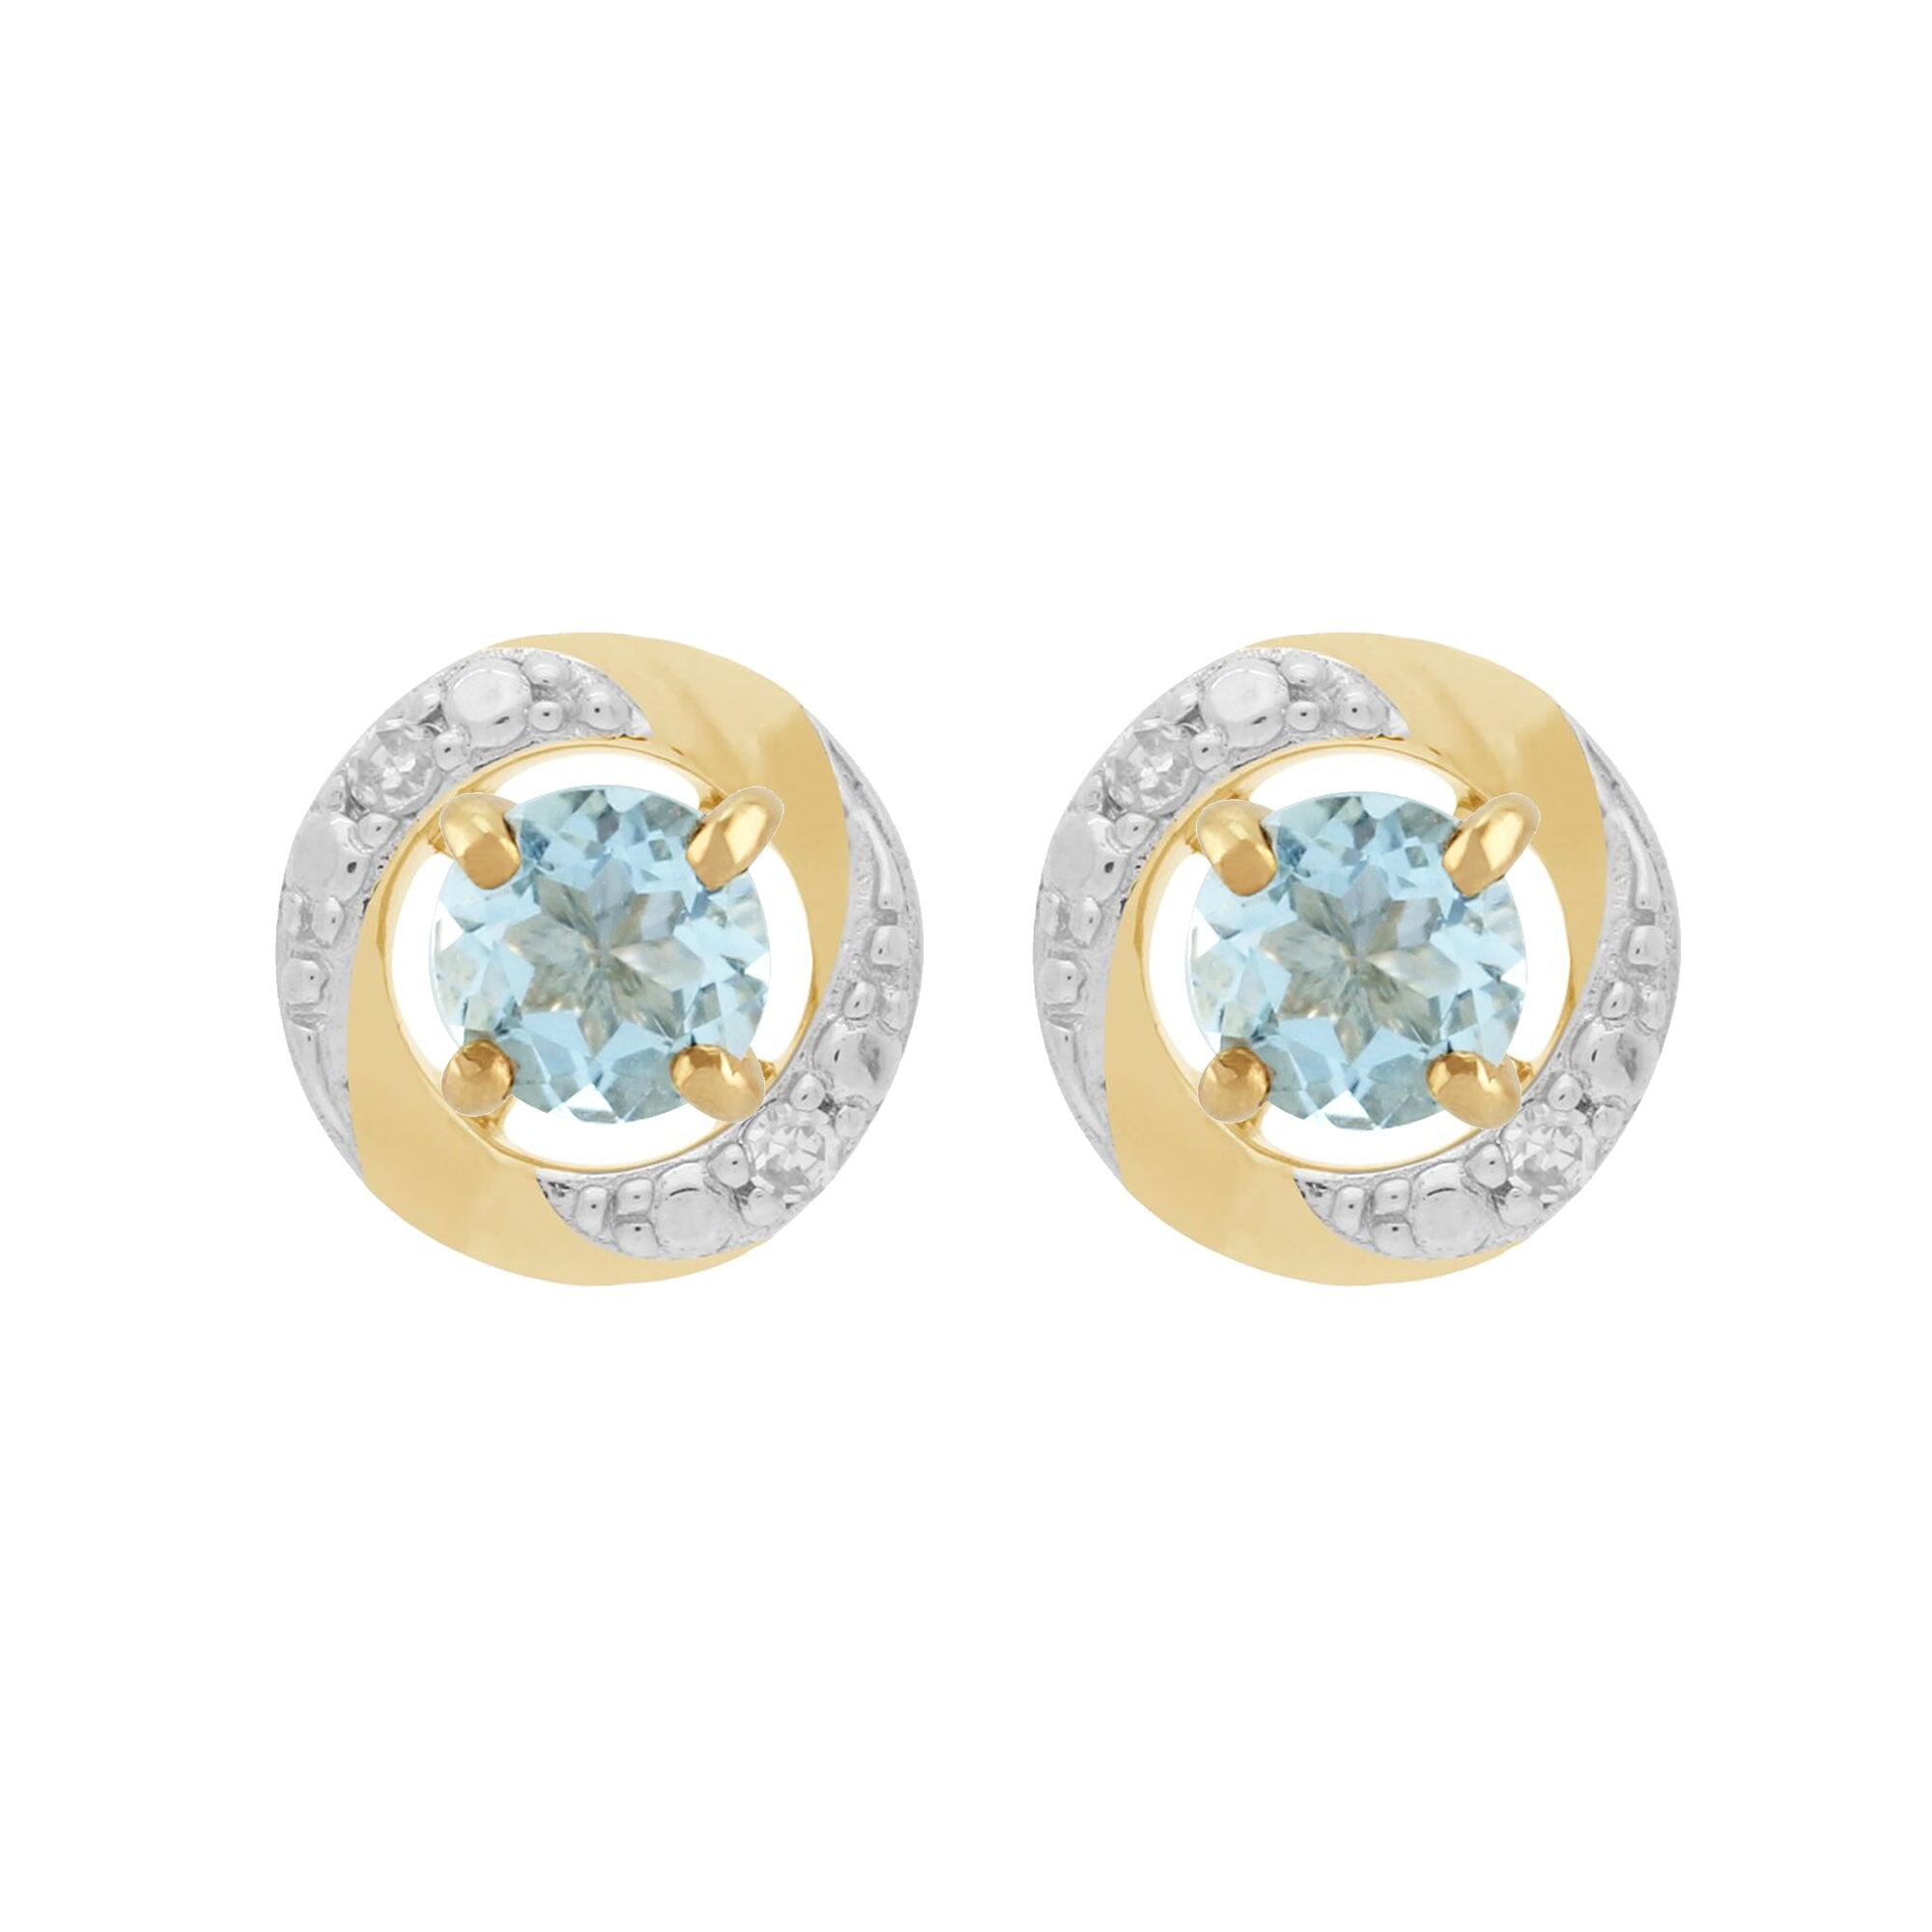 Classic Round Aquamarine Stud Earrings with Detachable Diamond Halo Ear Jacket in 9ct Yellow Gold